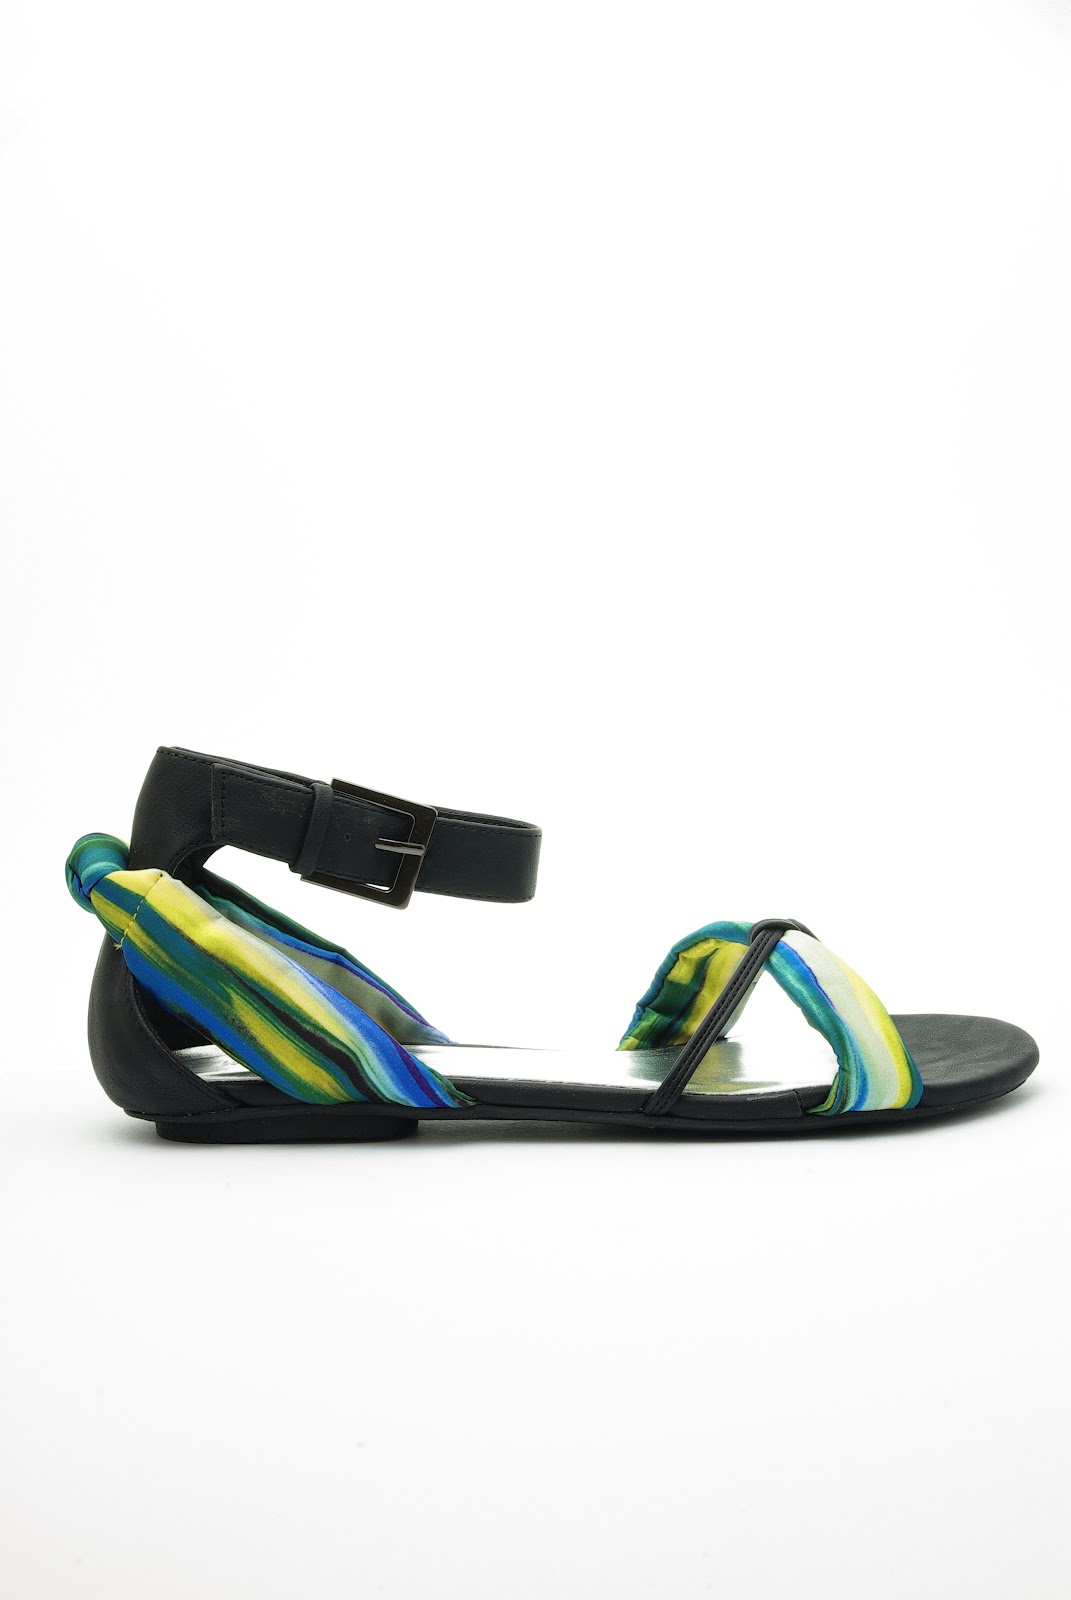 Only the Marvelous: Michael Antonio Shoes Spring-Summer 2012